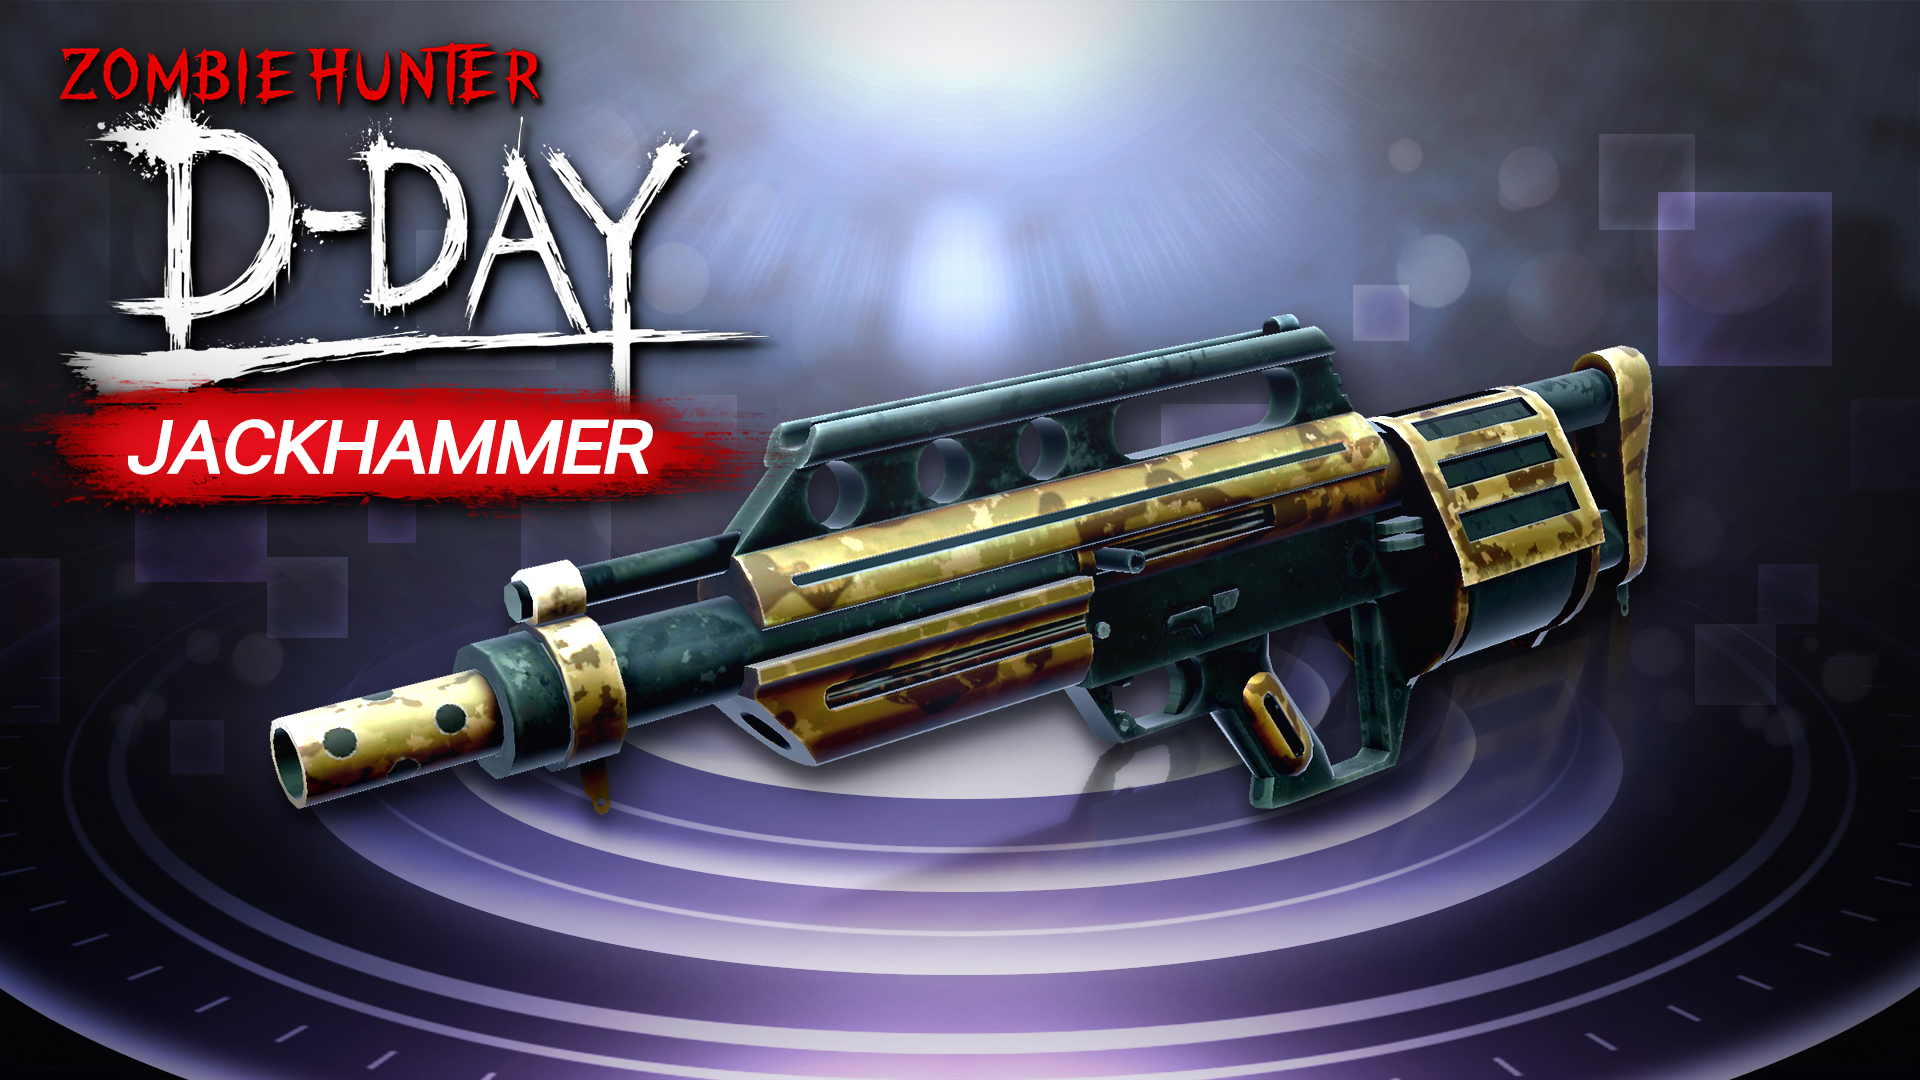 SS-ranked Weapon "JACKHAMMER"